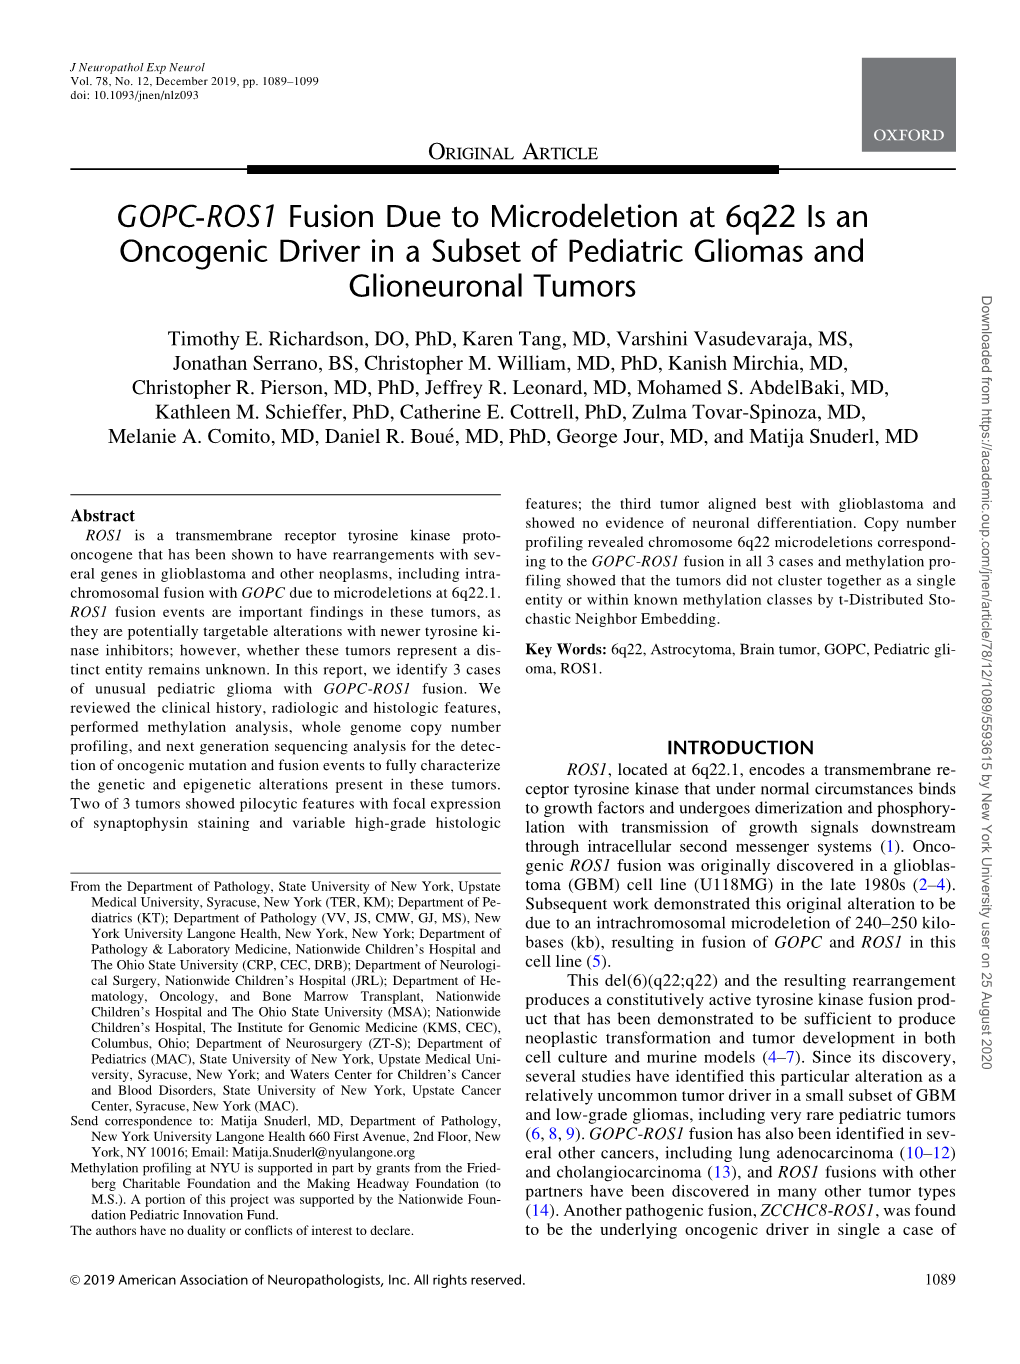 GOPC-ROS1 Fusion Due to Microdeletion at 6Q22 Is an Oncogenic Driver in a Subset of Pediatric Gliomas And